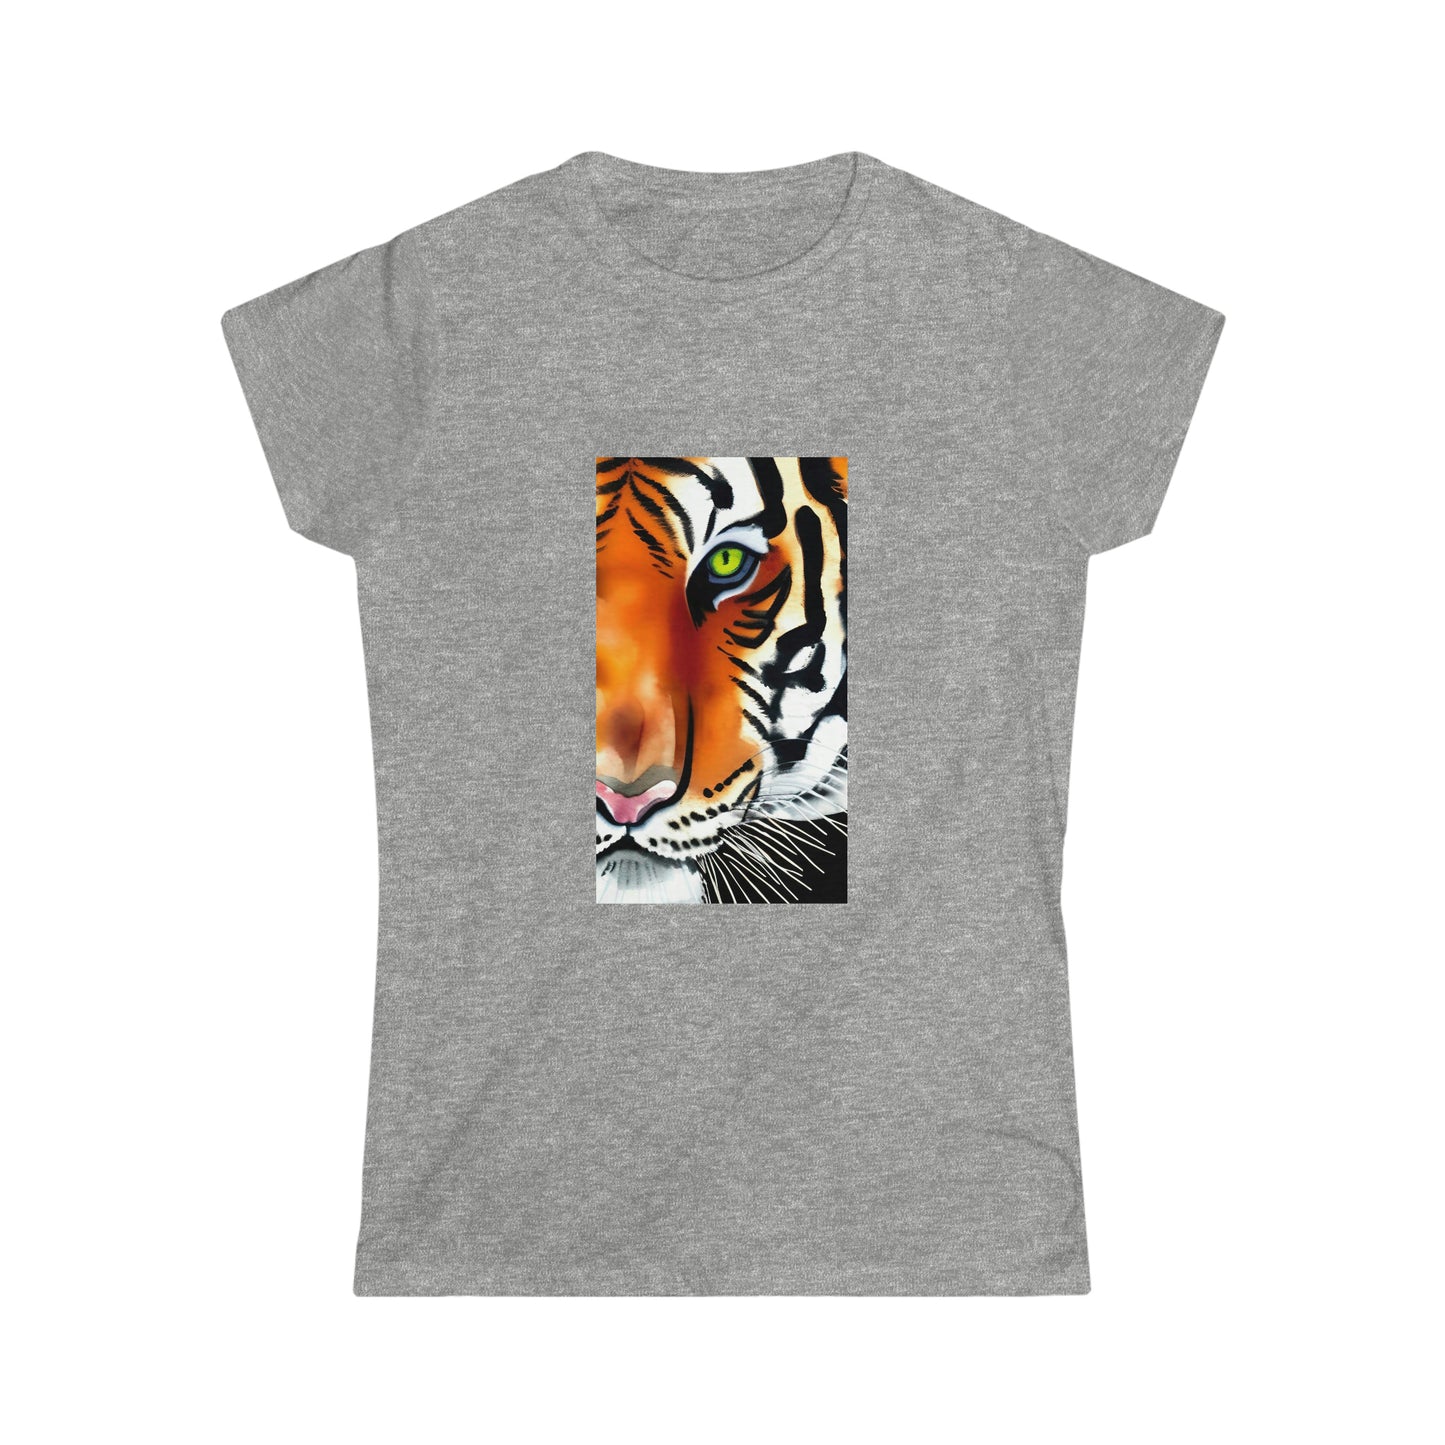 Women's Softstyle Tee - TIGER